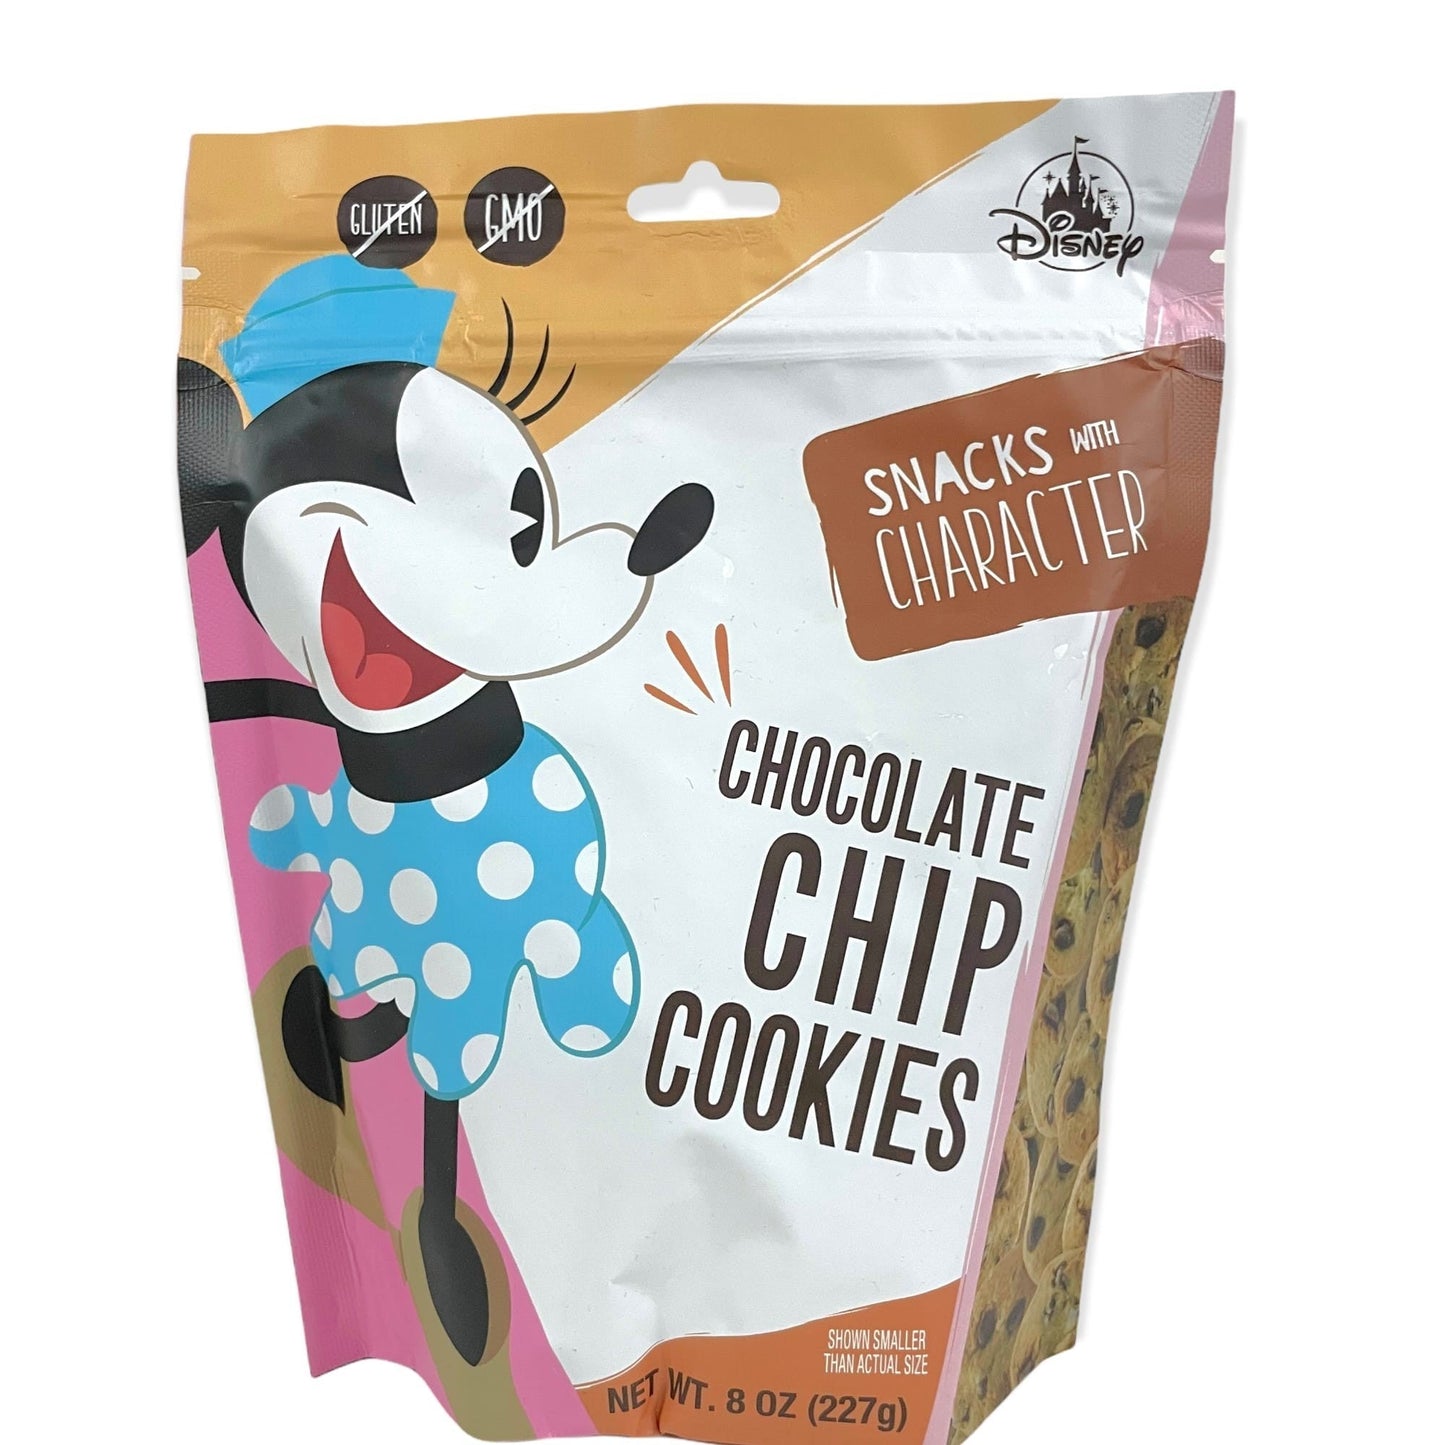 Gluten Free Disney Snacks with Character Chocolate Chip Cookies - 8 oz